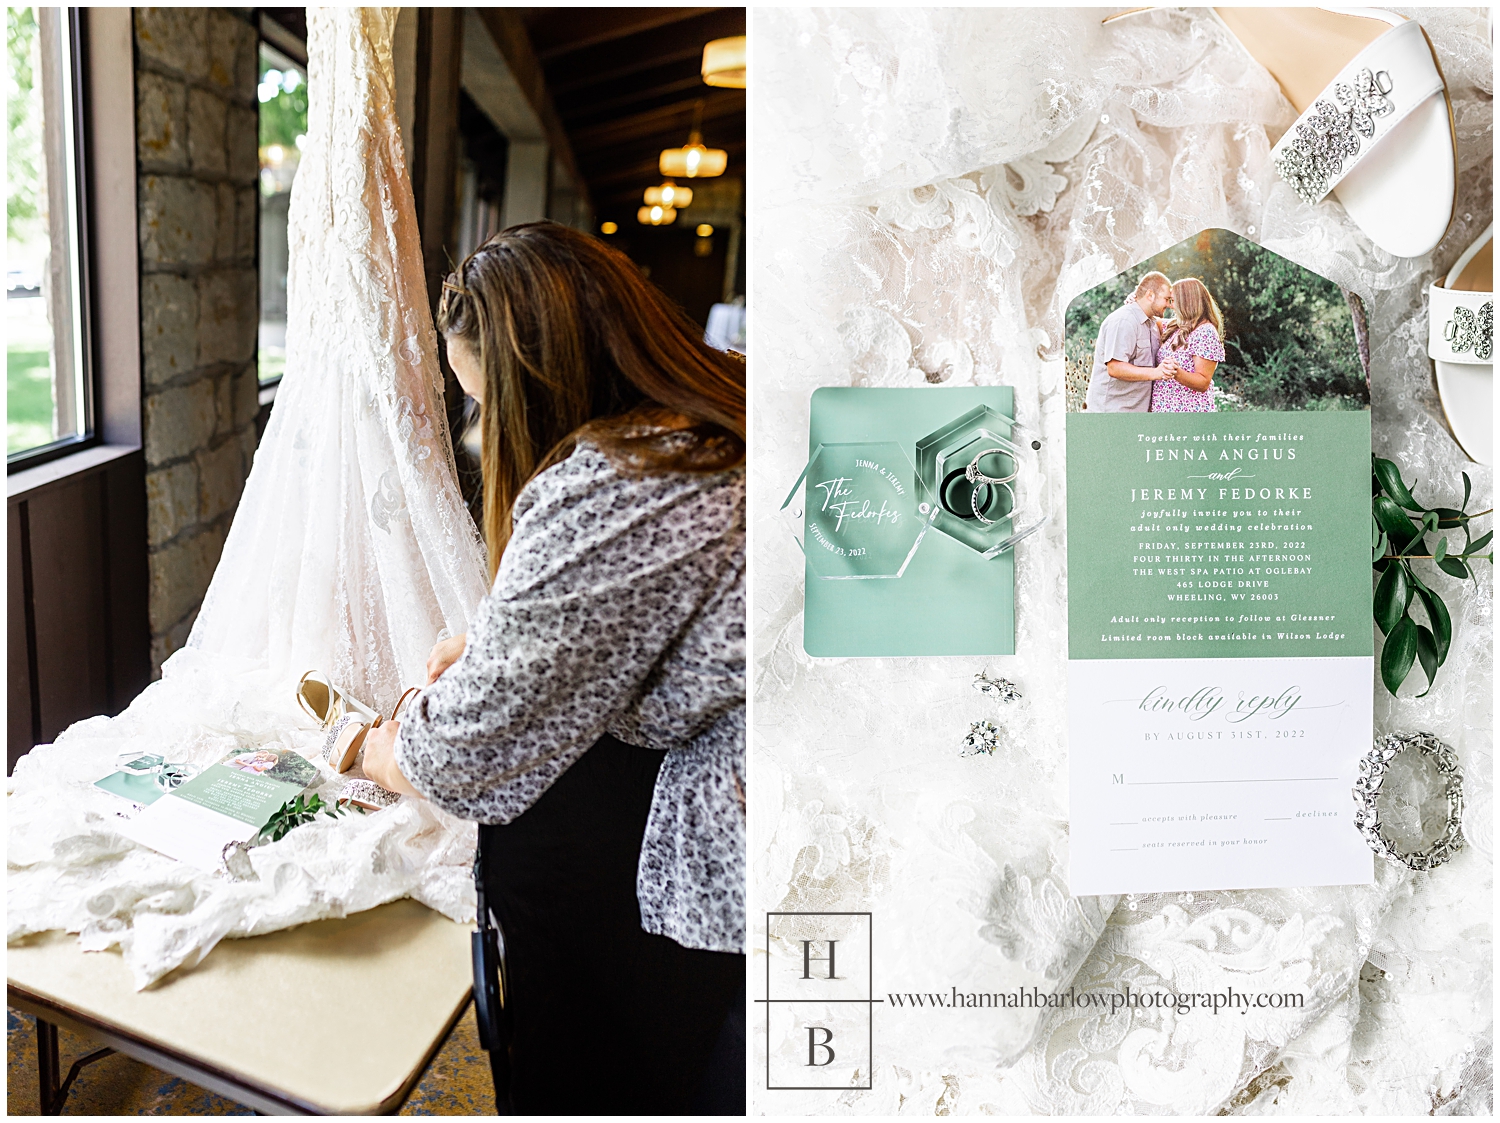 Behind the scenes photo of bridal details and invitation